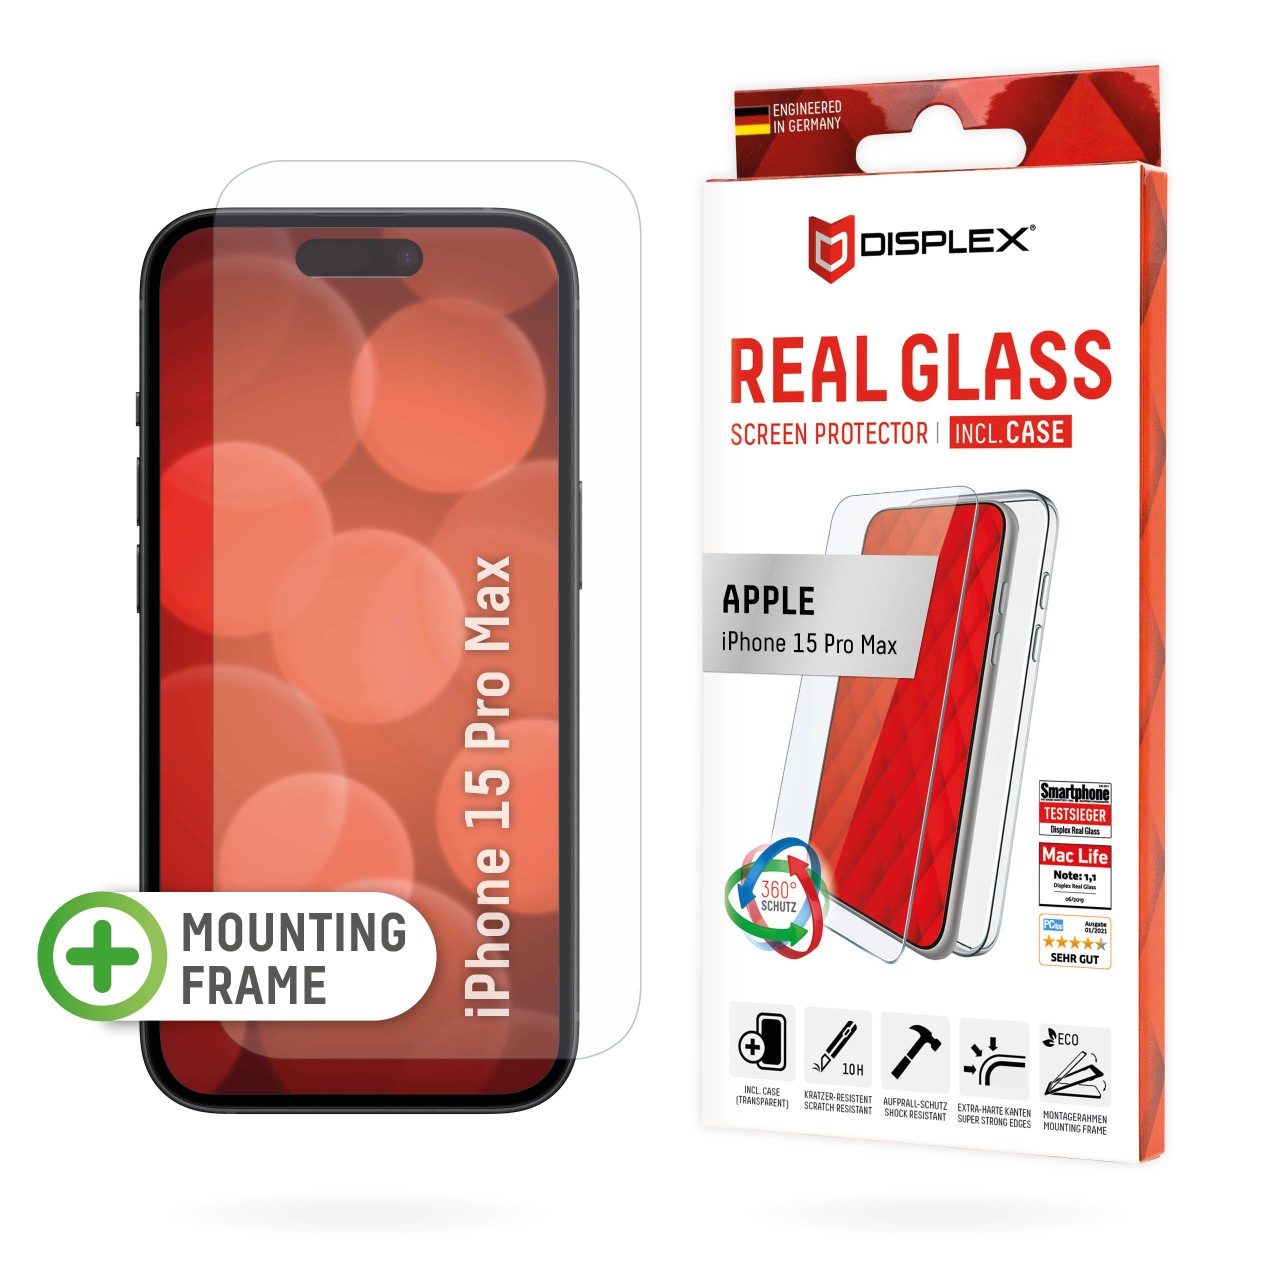 Real Glass for Apple iPhone X/XS/11 Pro (5,8"), Full Cover